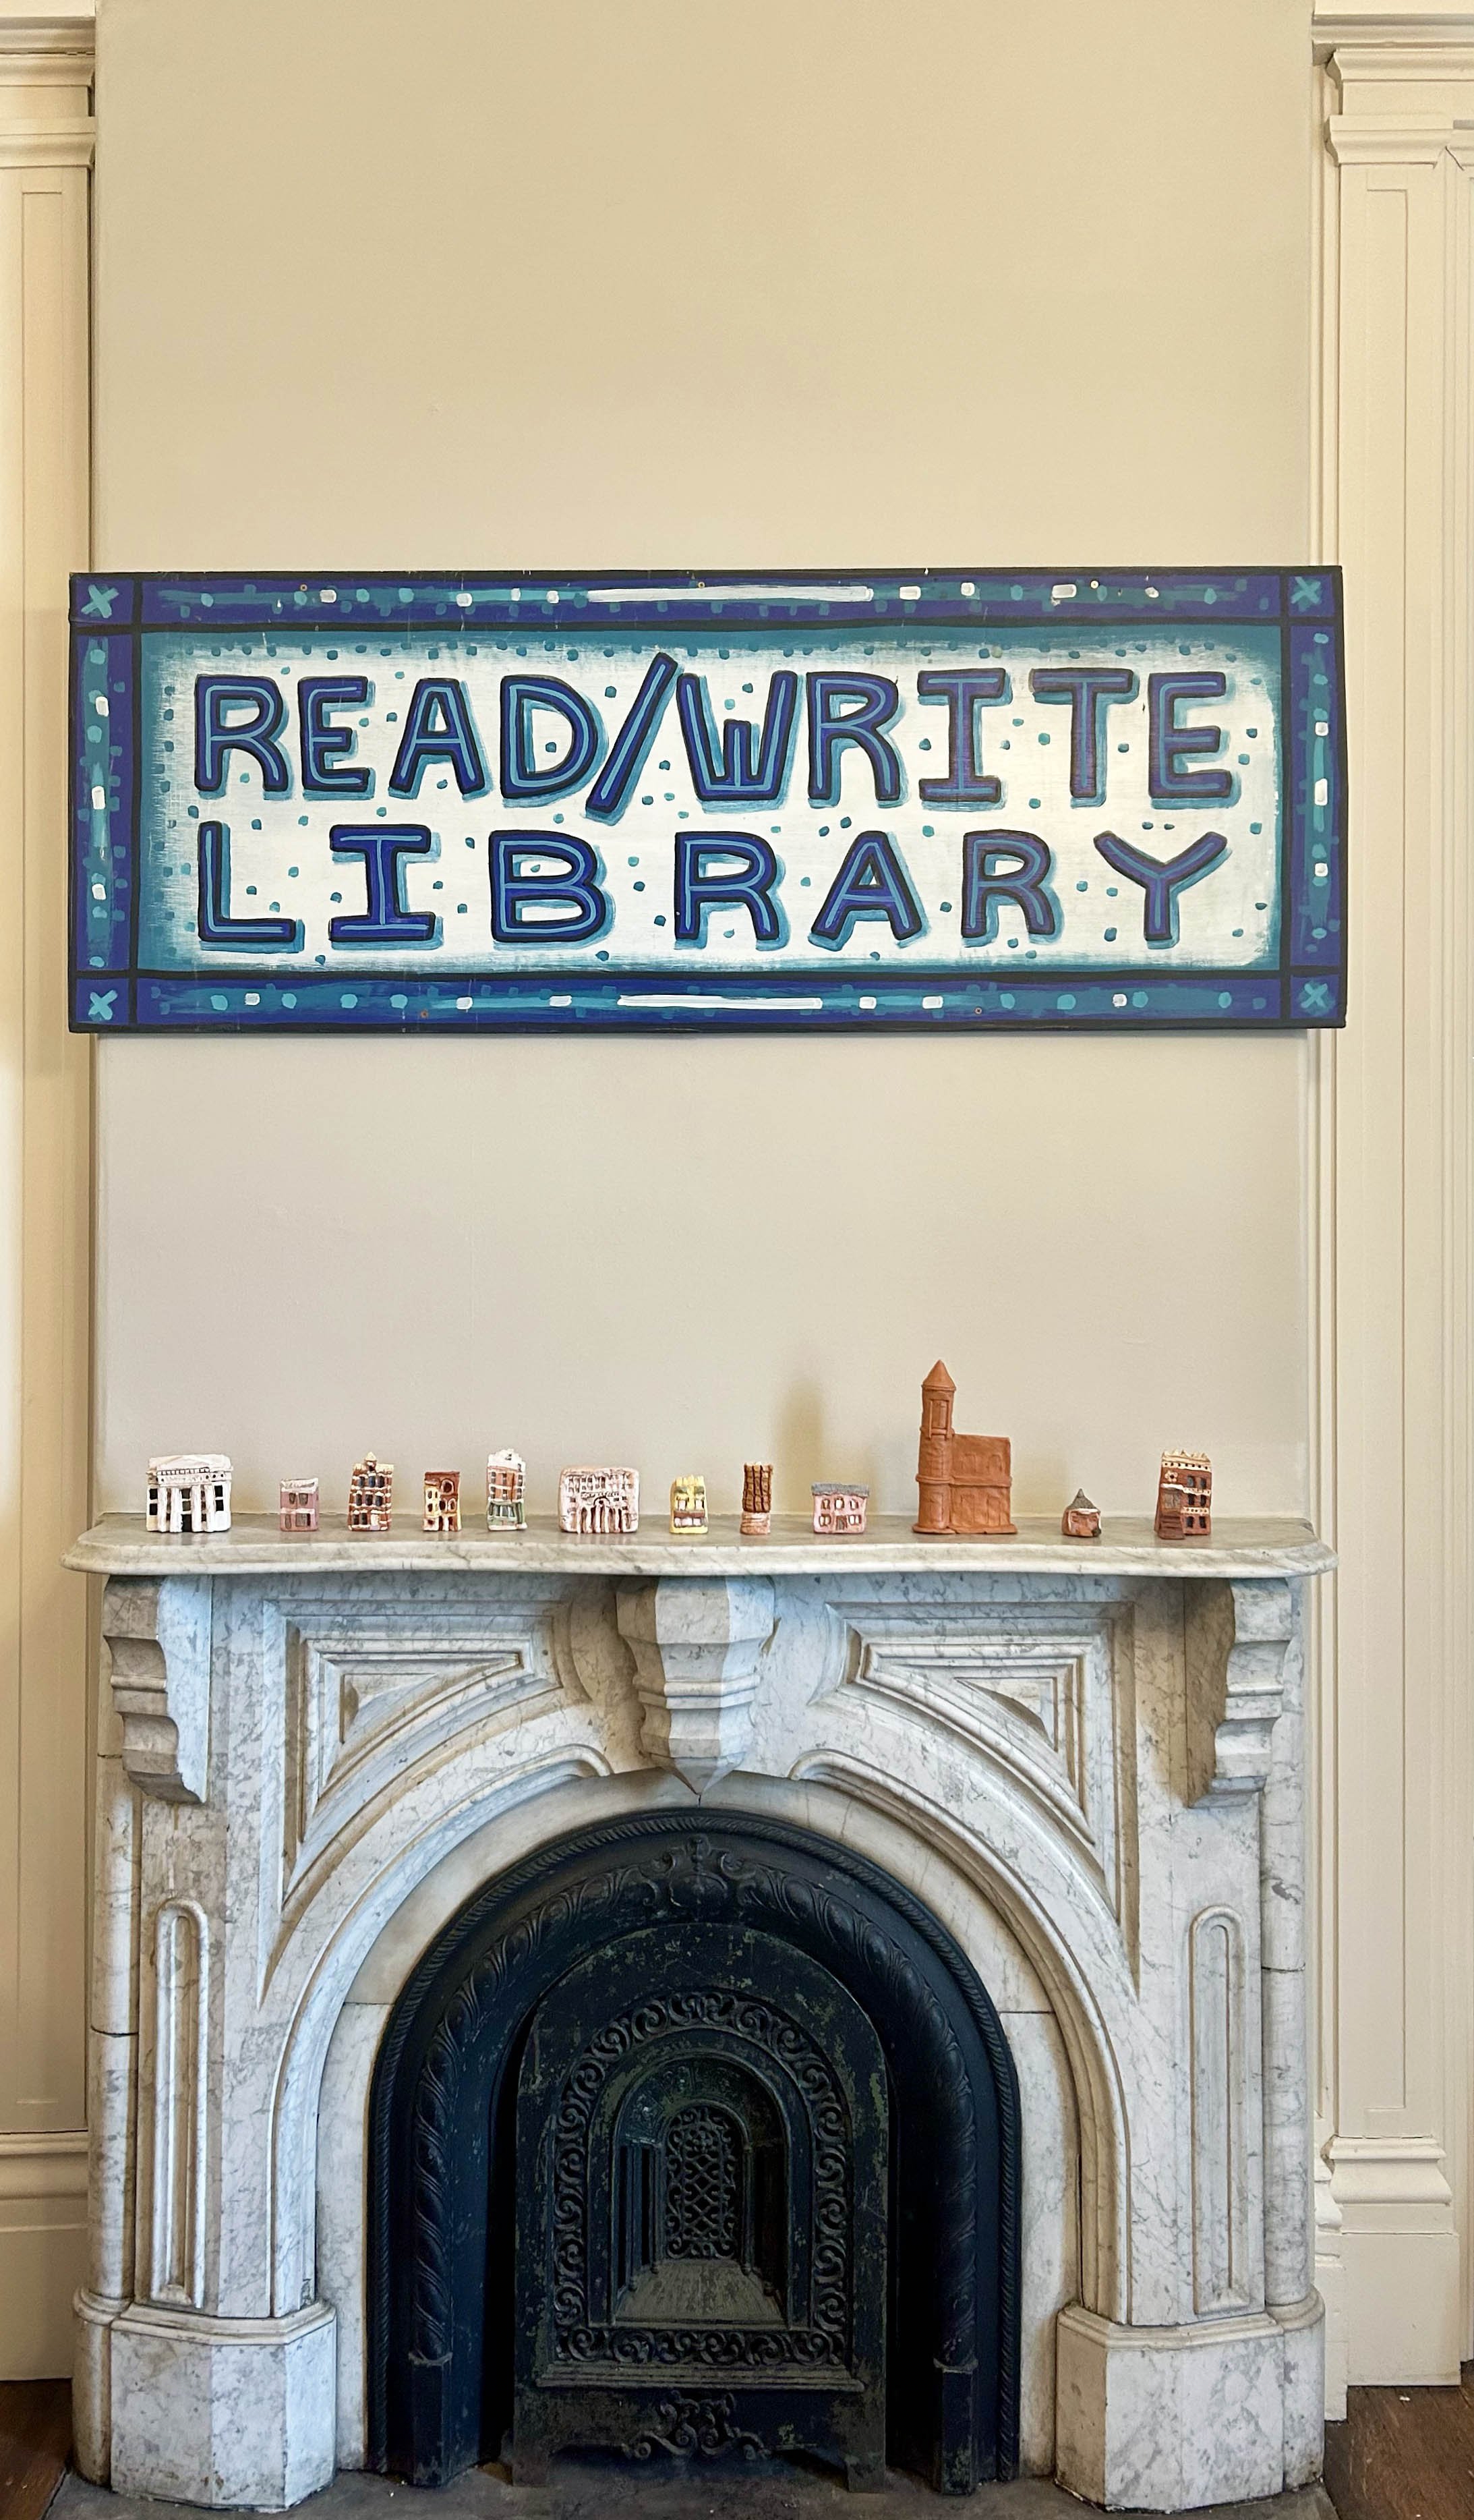 Read/Write Library | Exhibition | April 9-July 21